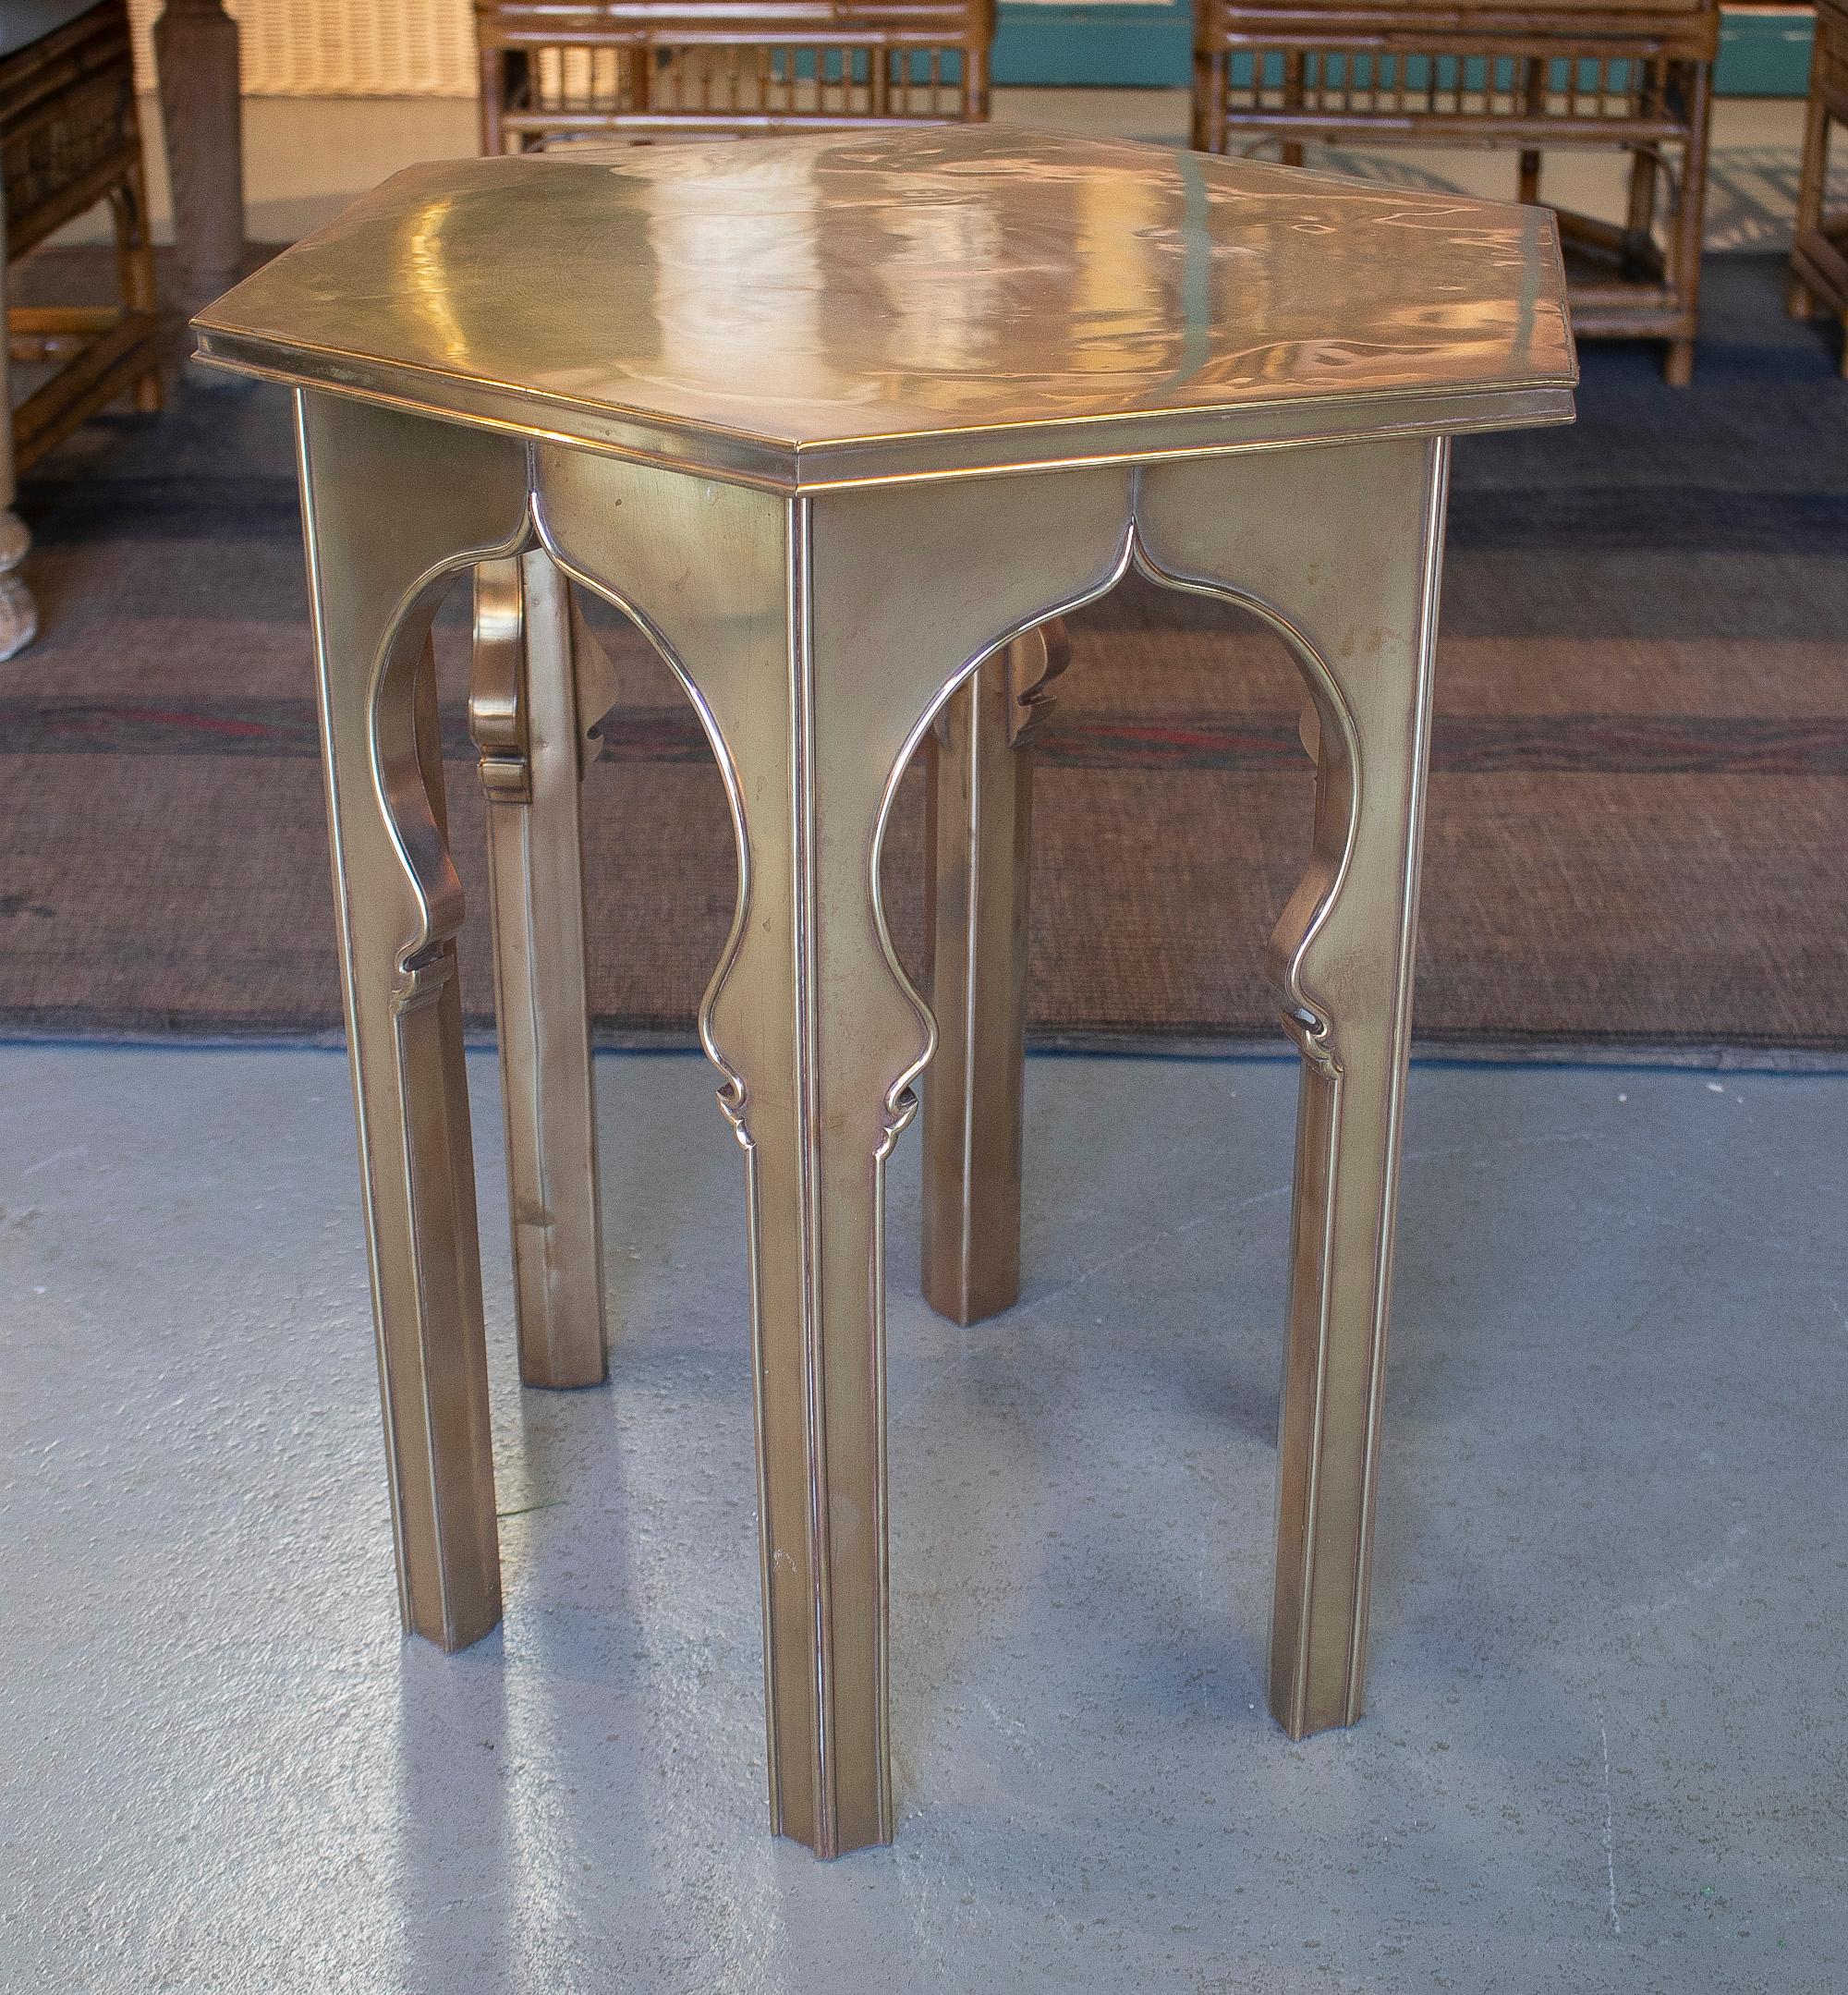 1970s Spanish bronze lined hexagonal side table in Arabesque style.